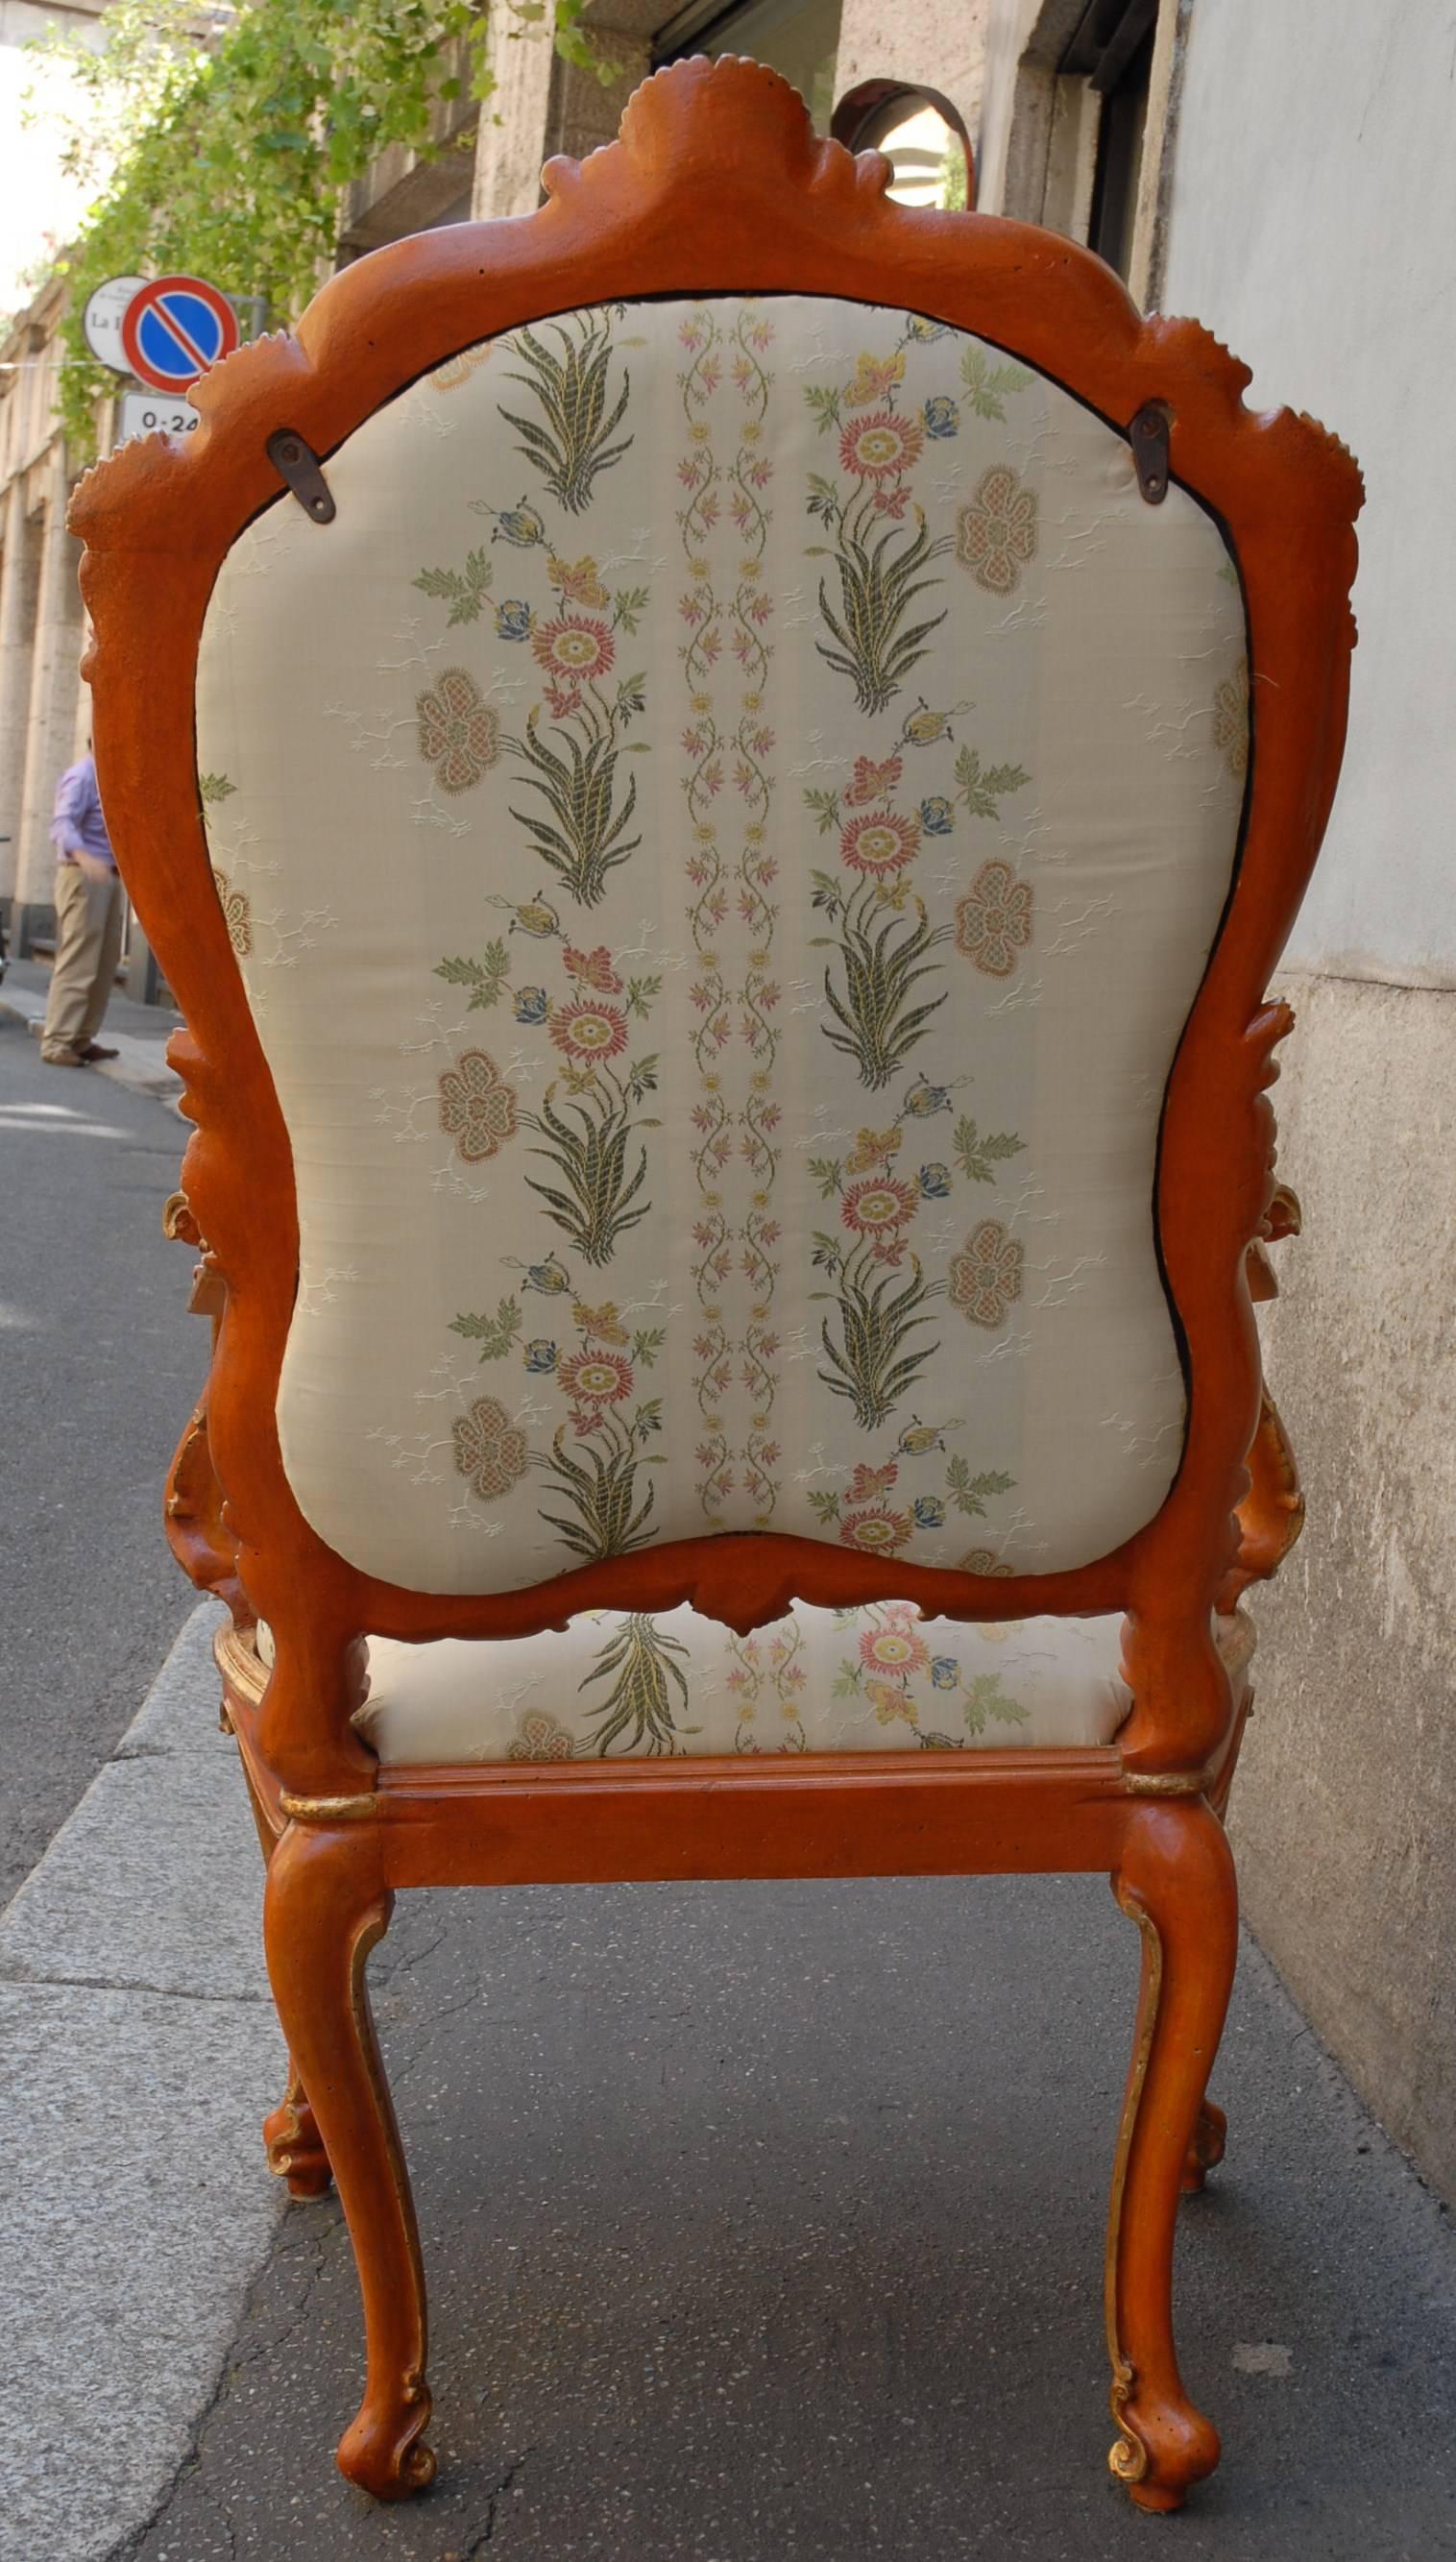 Pair of Baroque Venetian lacquered and giltwood armchairs, beginning of 18th century, very rare, first patina, upholstery changed, very rare to find, is possible to buy two pairs because we have four of them.